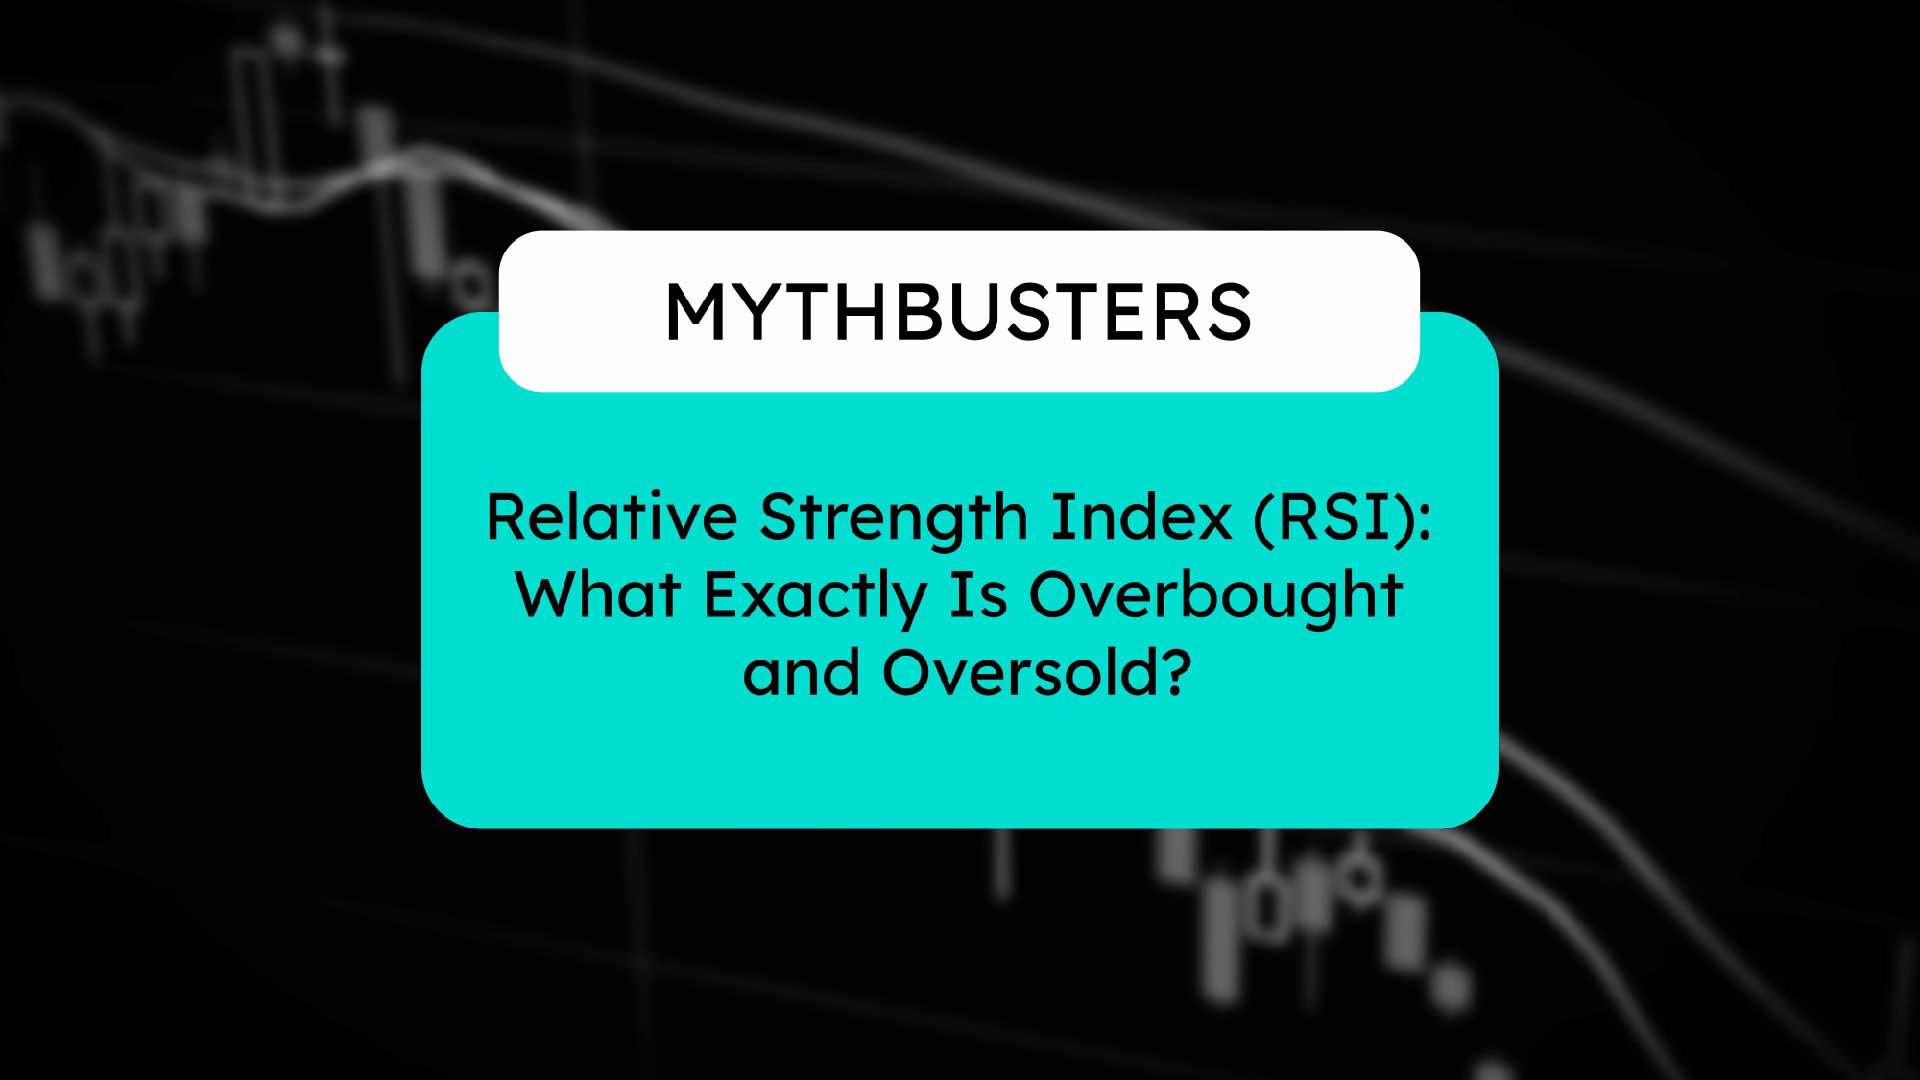 Relative Strength Index (RSI): What Exactly Is Overbought and Oversold?